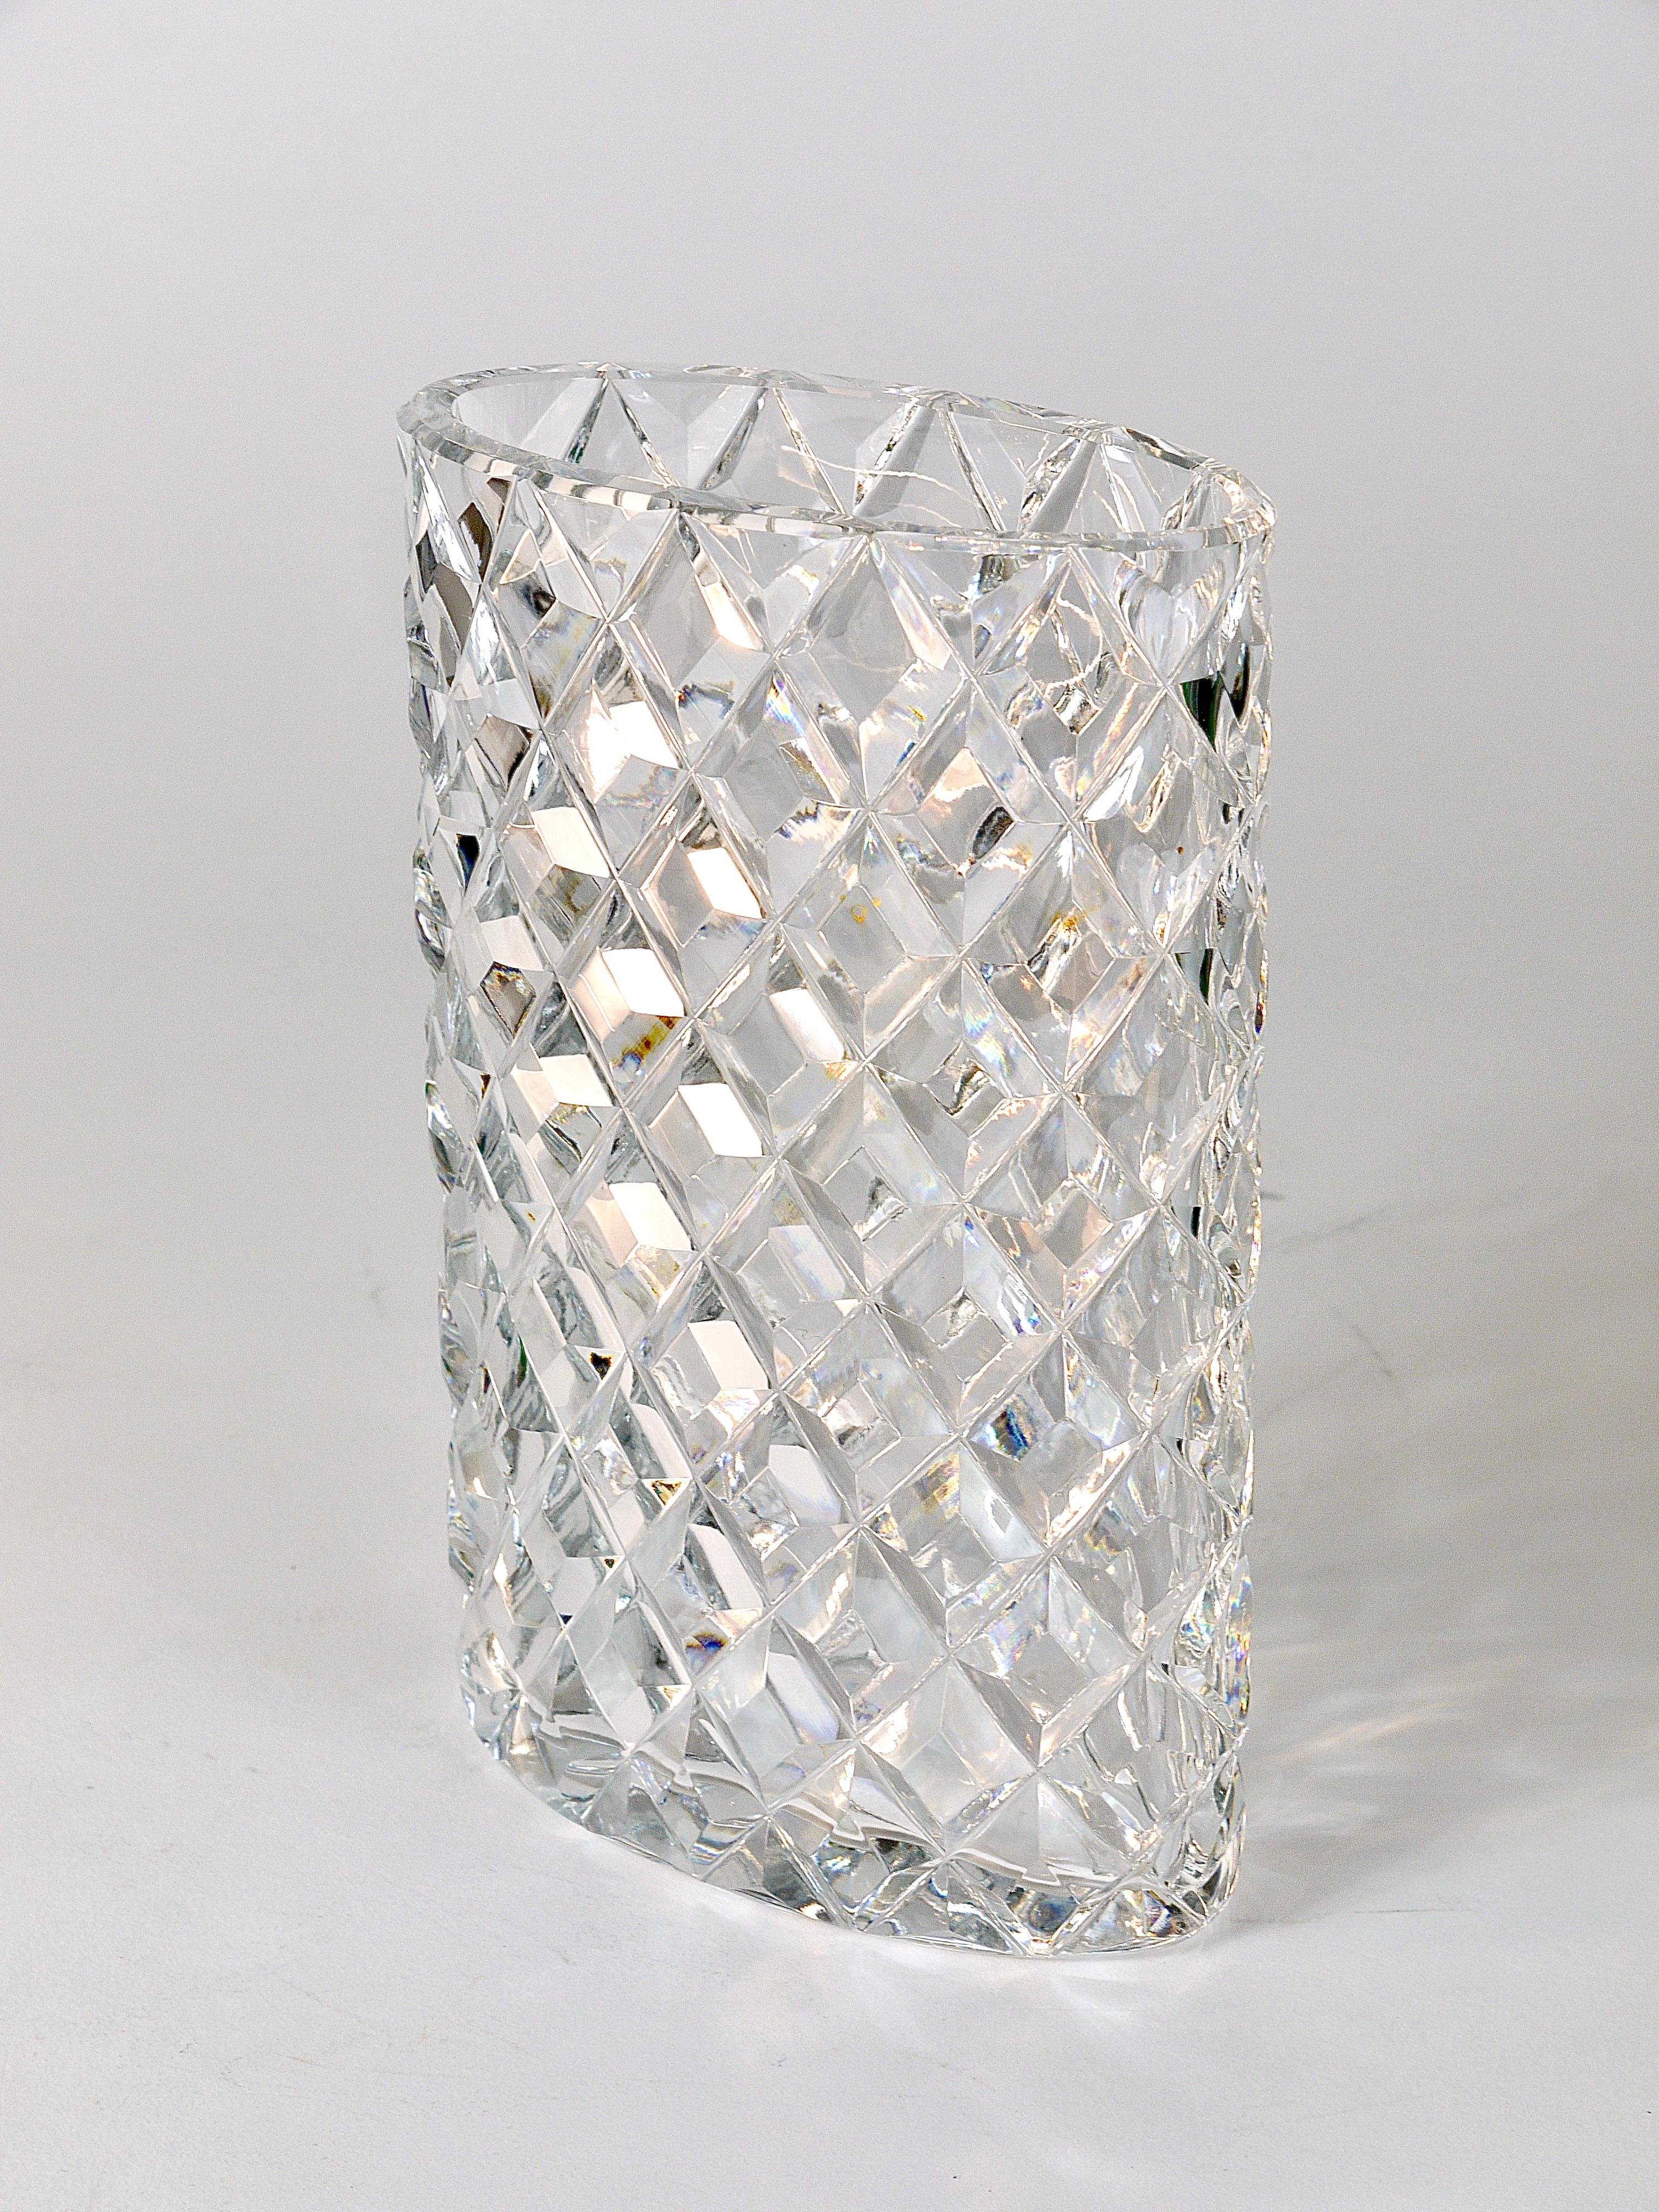 Sparkling Facetted Crystal Glass Vase by Claus Josef Riedel, Austria, 1970s For Sale 8